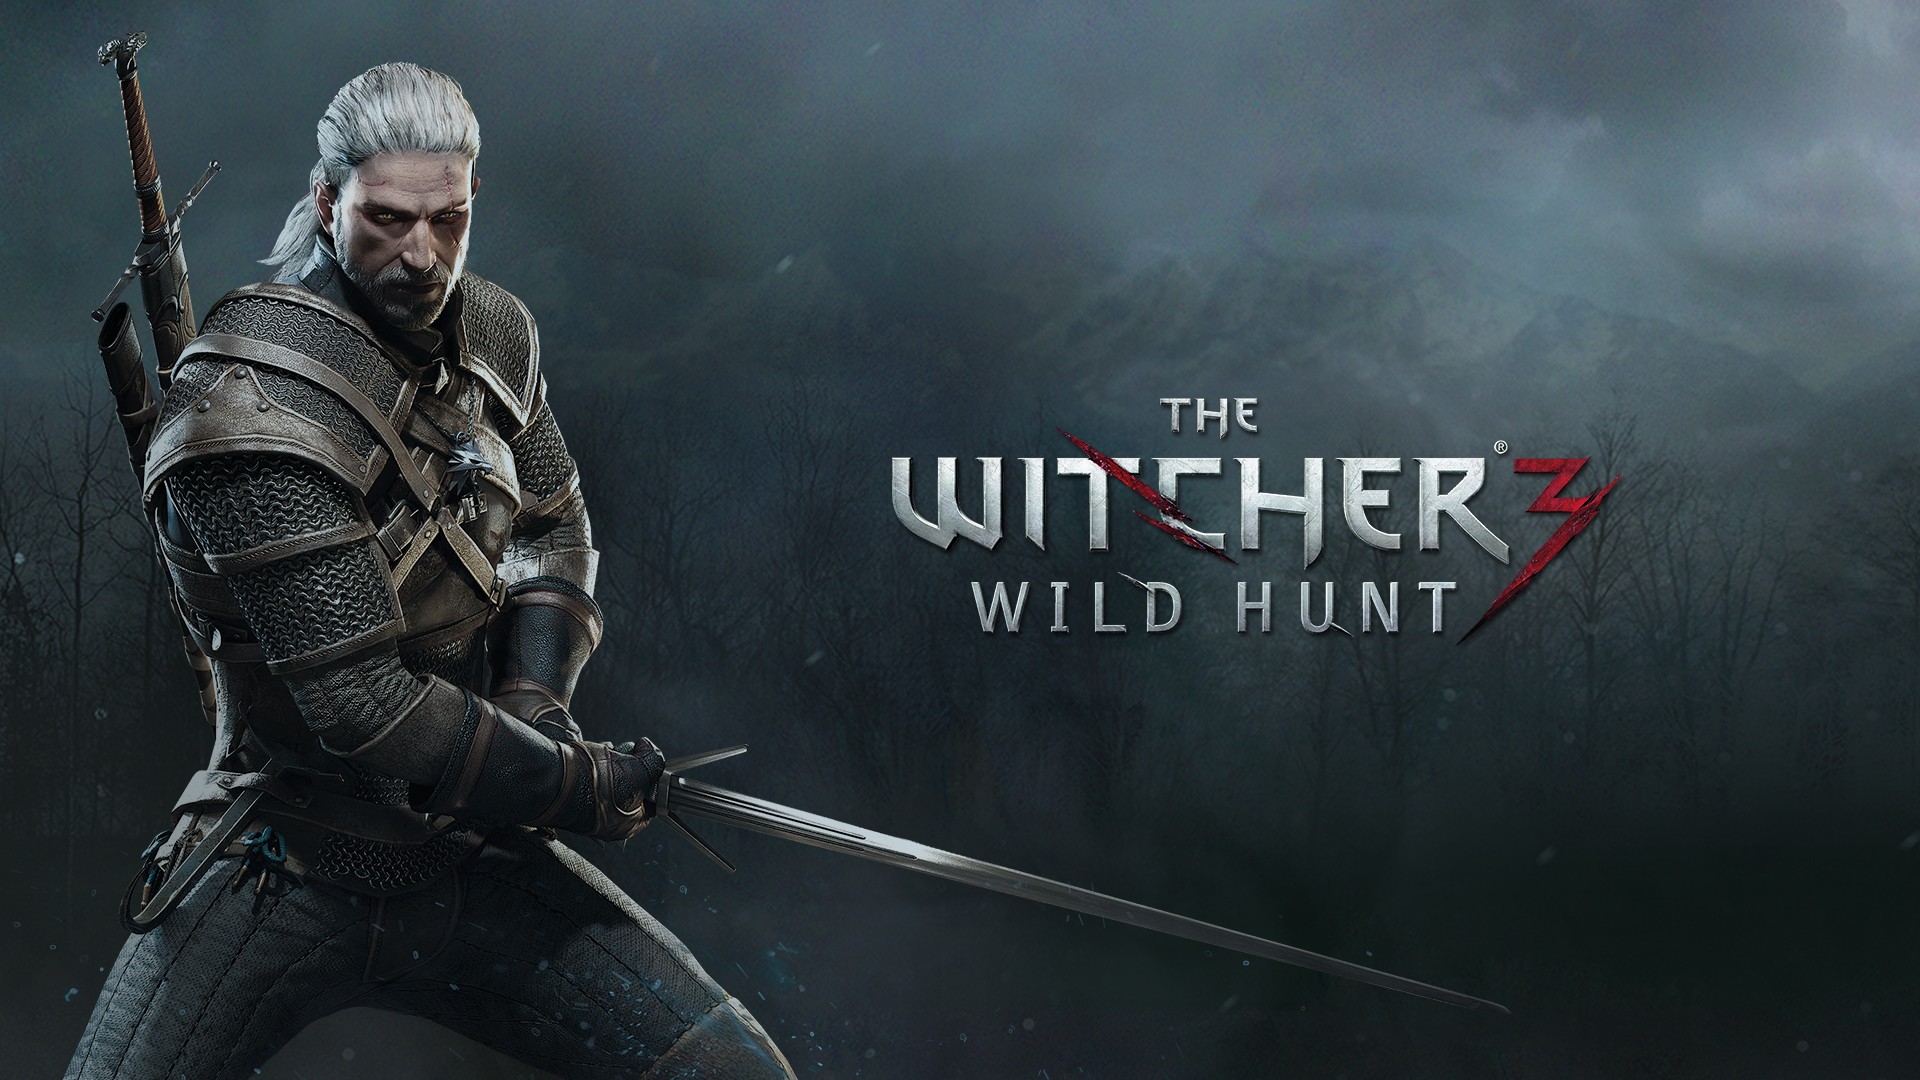 Geralt Of Rivia, The Witcher 3: Wild Hunt, CD Projekt RED, PC Gaming, The Witcher Wallpaper